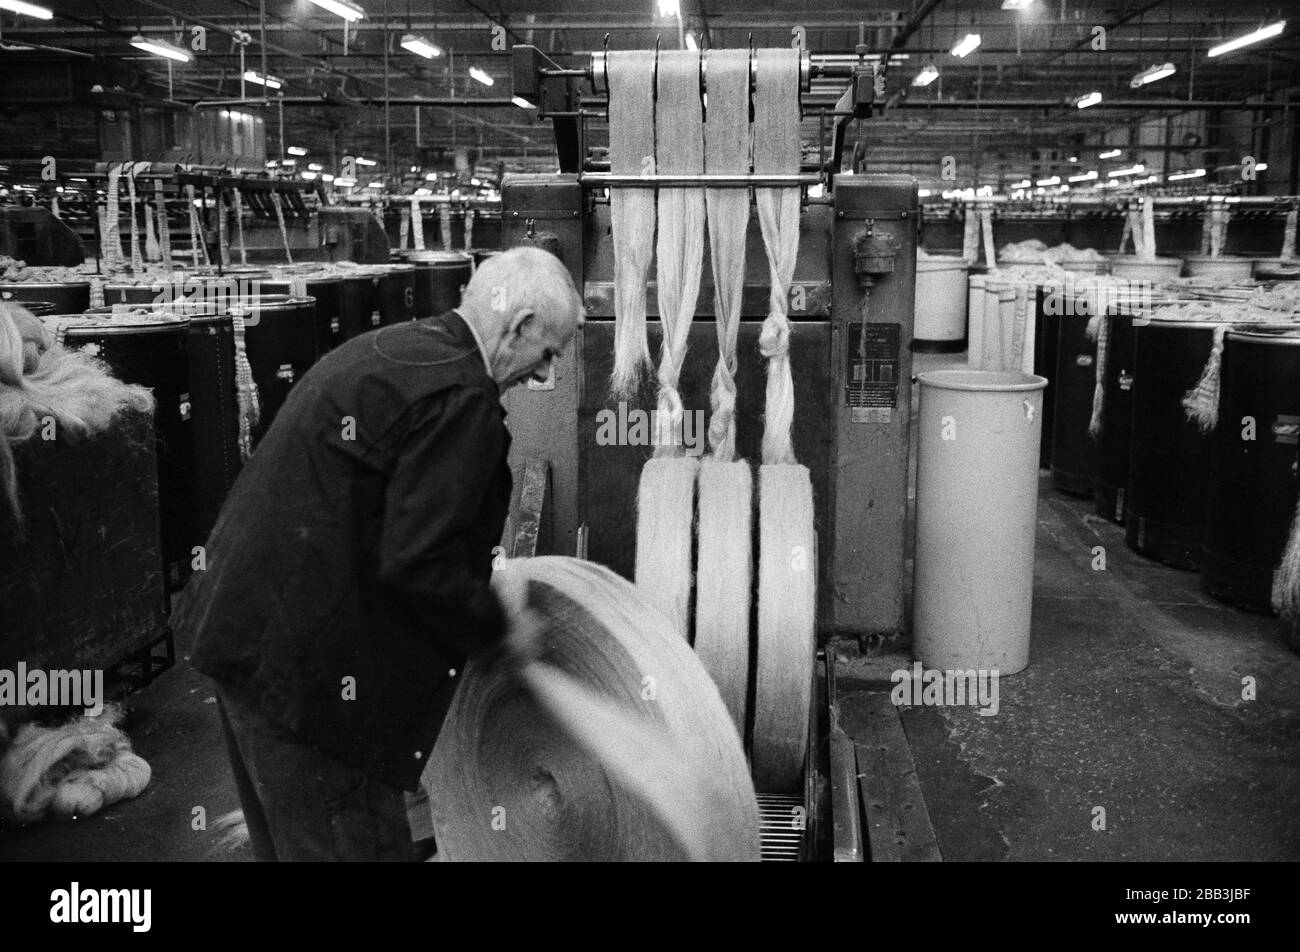 A worker with circular rolls of jute at Tay Spinners mill in Dundee, Scotland. This factory was the last jute spinning mill in Europe when it closed for the final time in 1998. The city of Dundee had been famous throughout history for the three 'Js' - jute, jam and journalism. Stock Photo